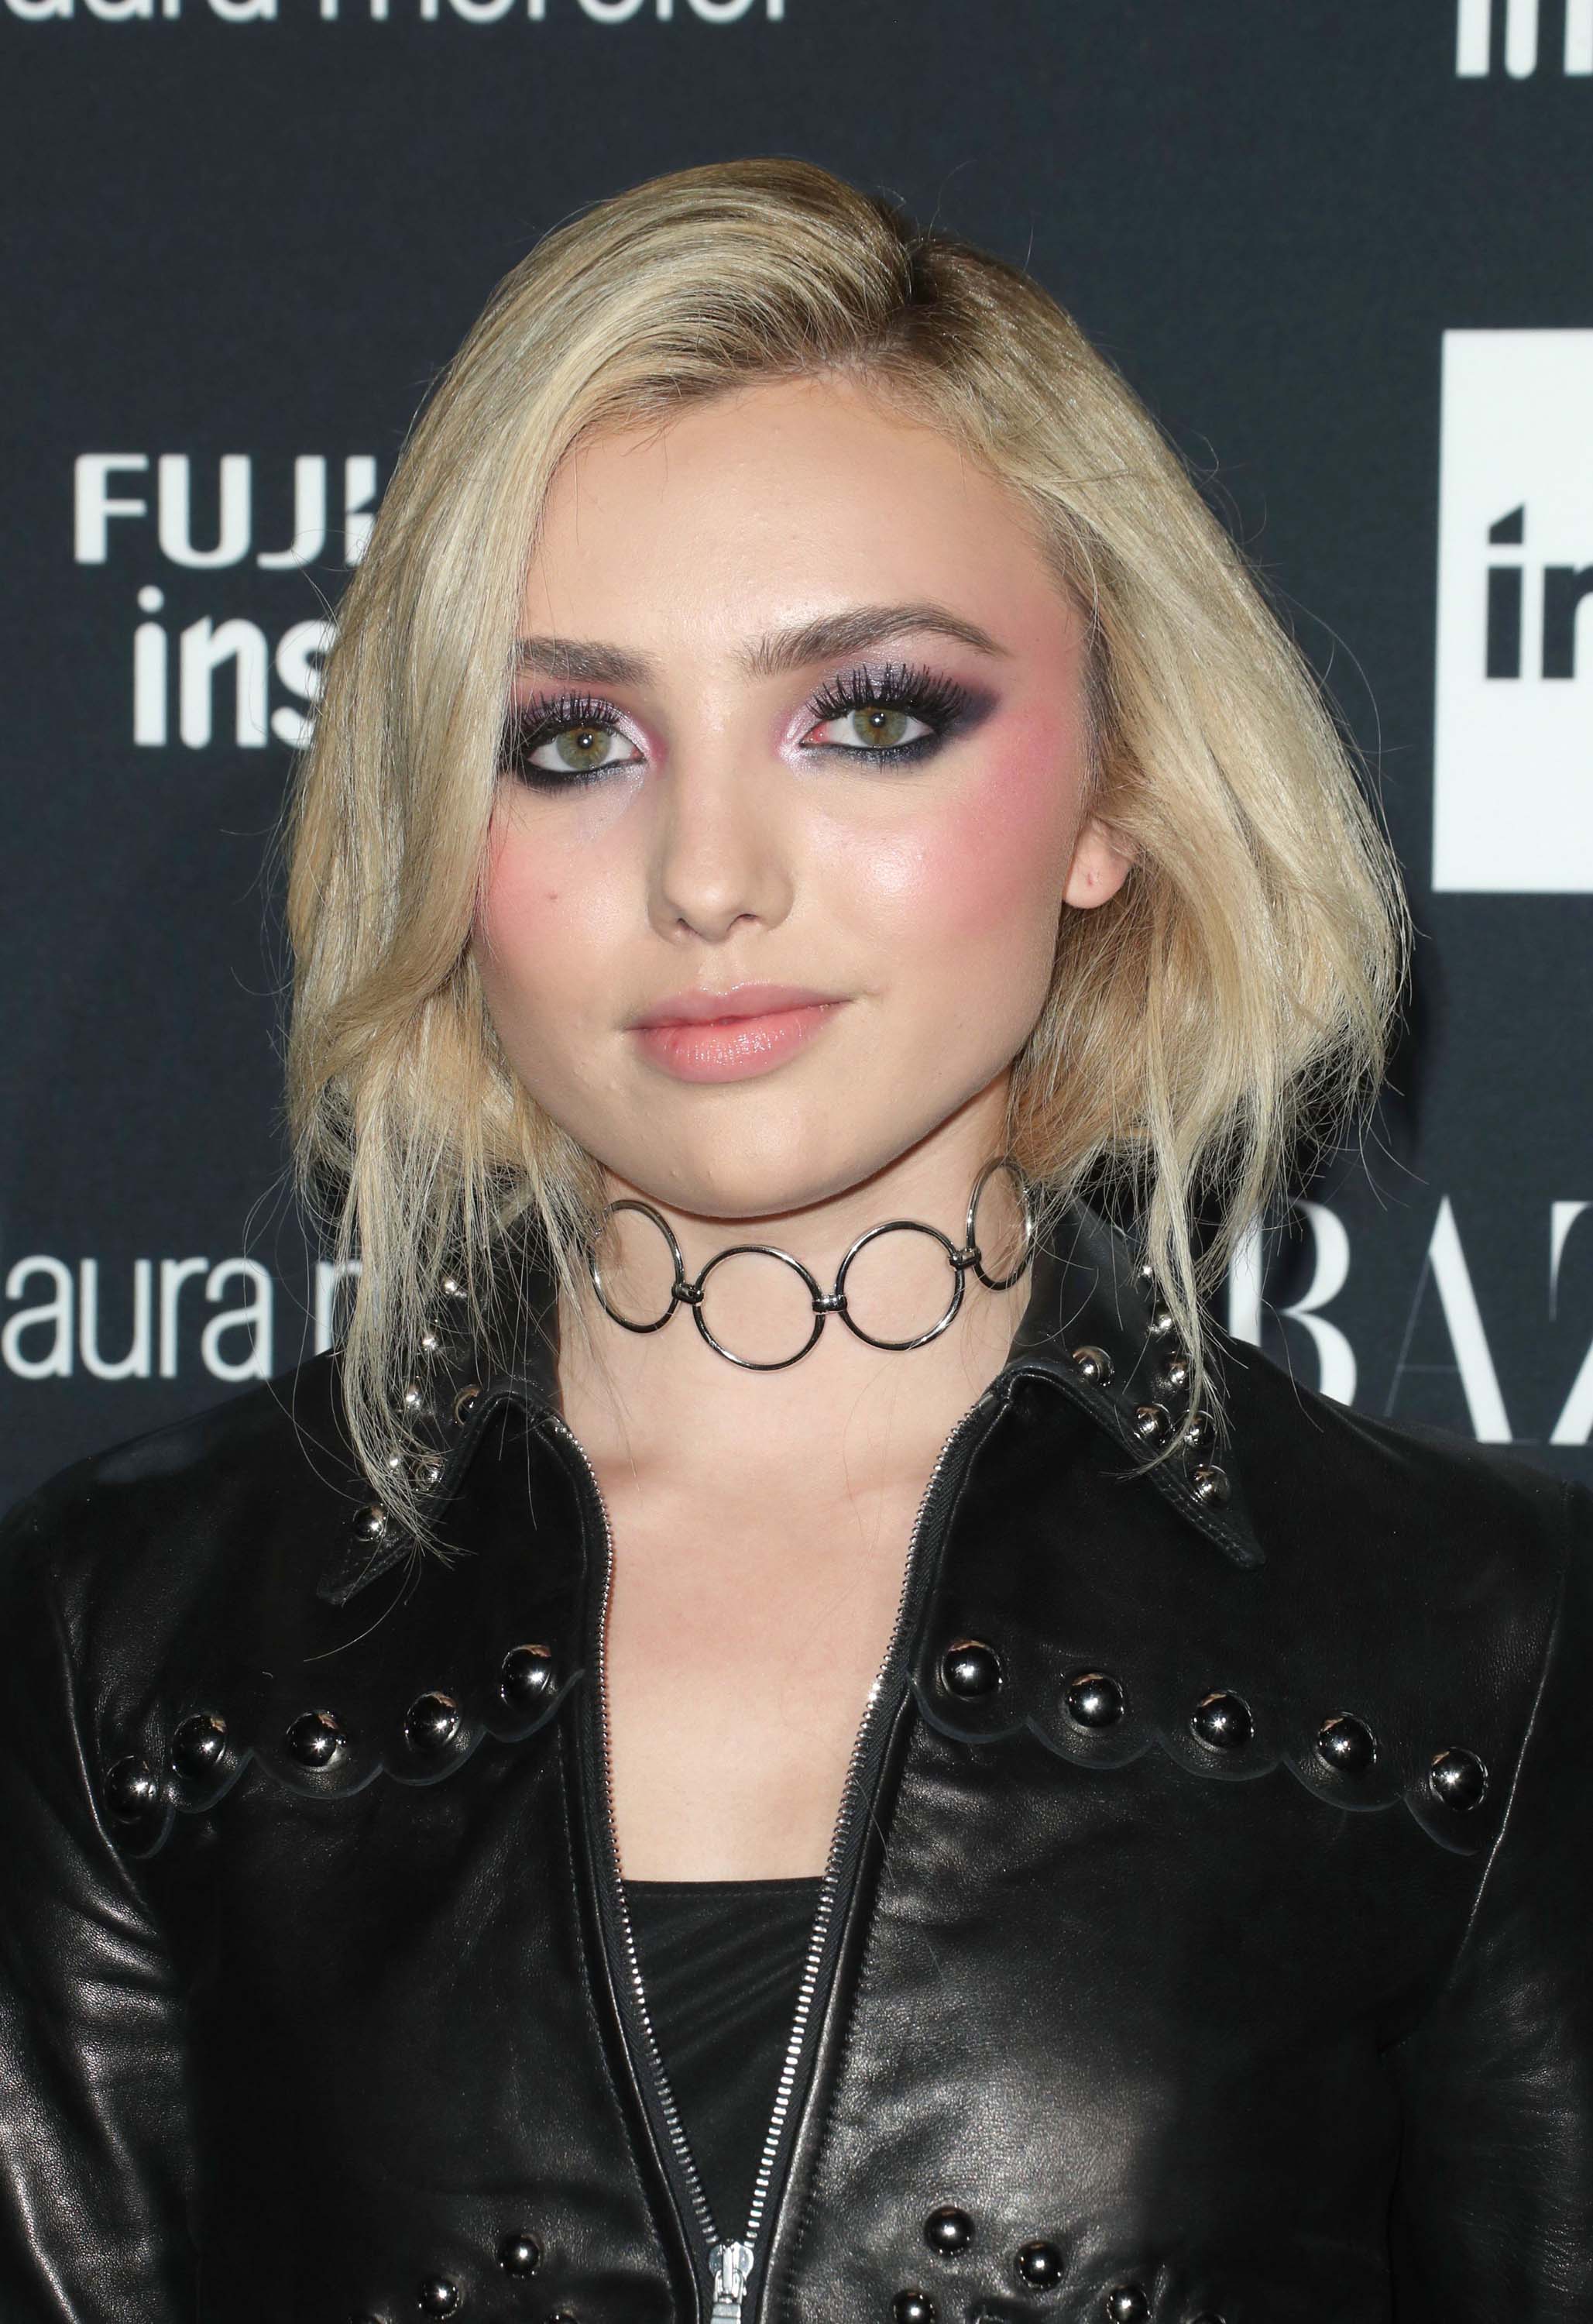 Peyton Roi List attends Harper’s Bazaar ICONS party